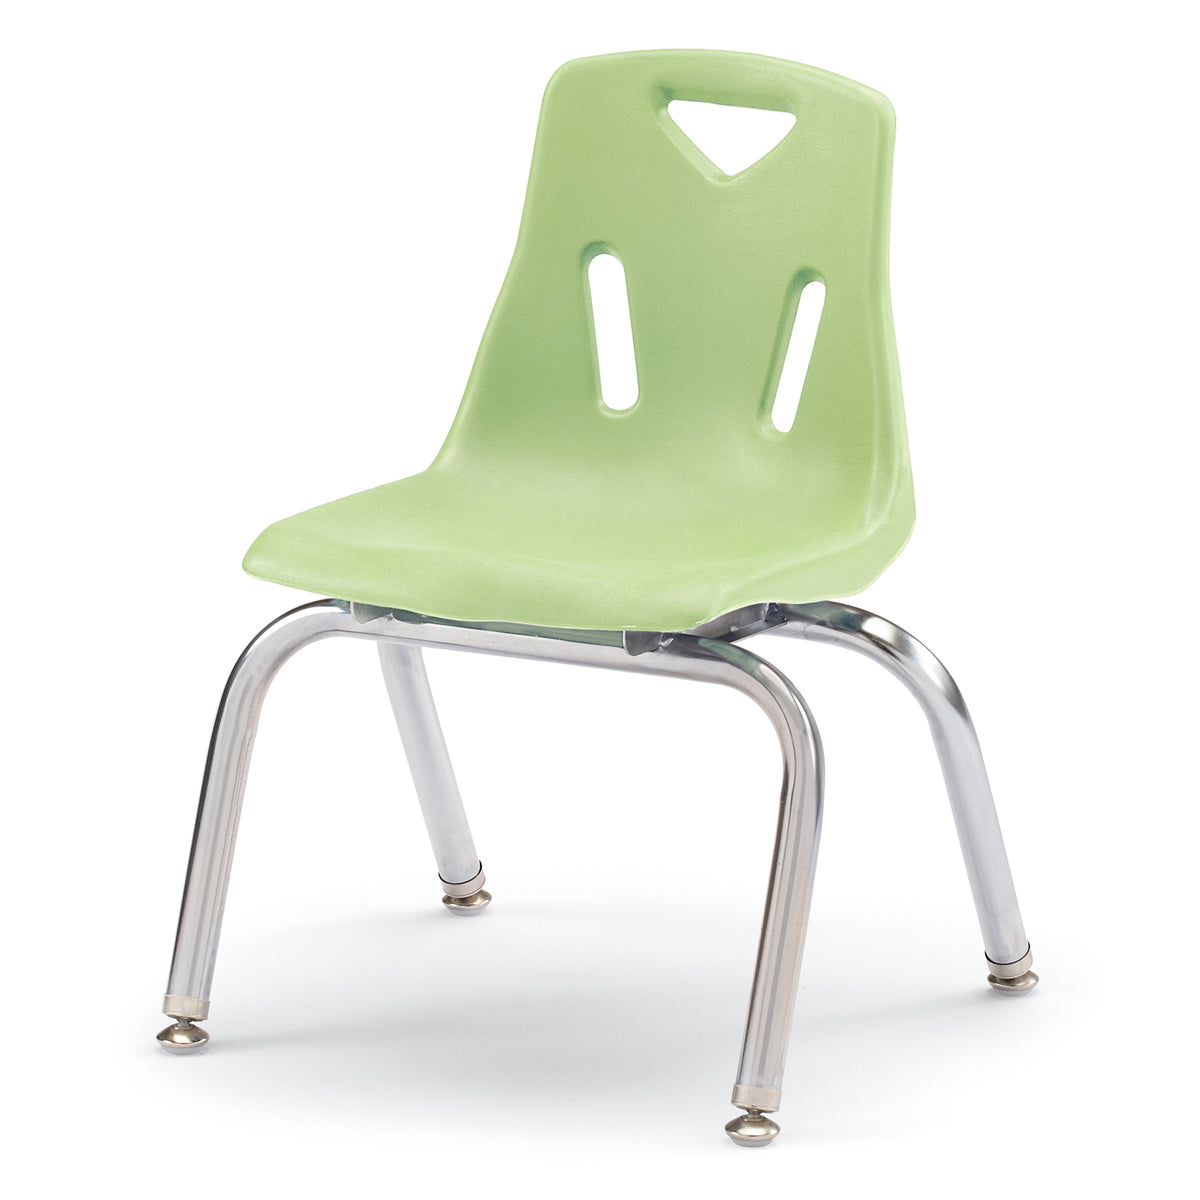 8142JC1130, Berries Stacking Chair with Chrome-Plated Legs - 12" Ht - Key Lime